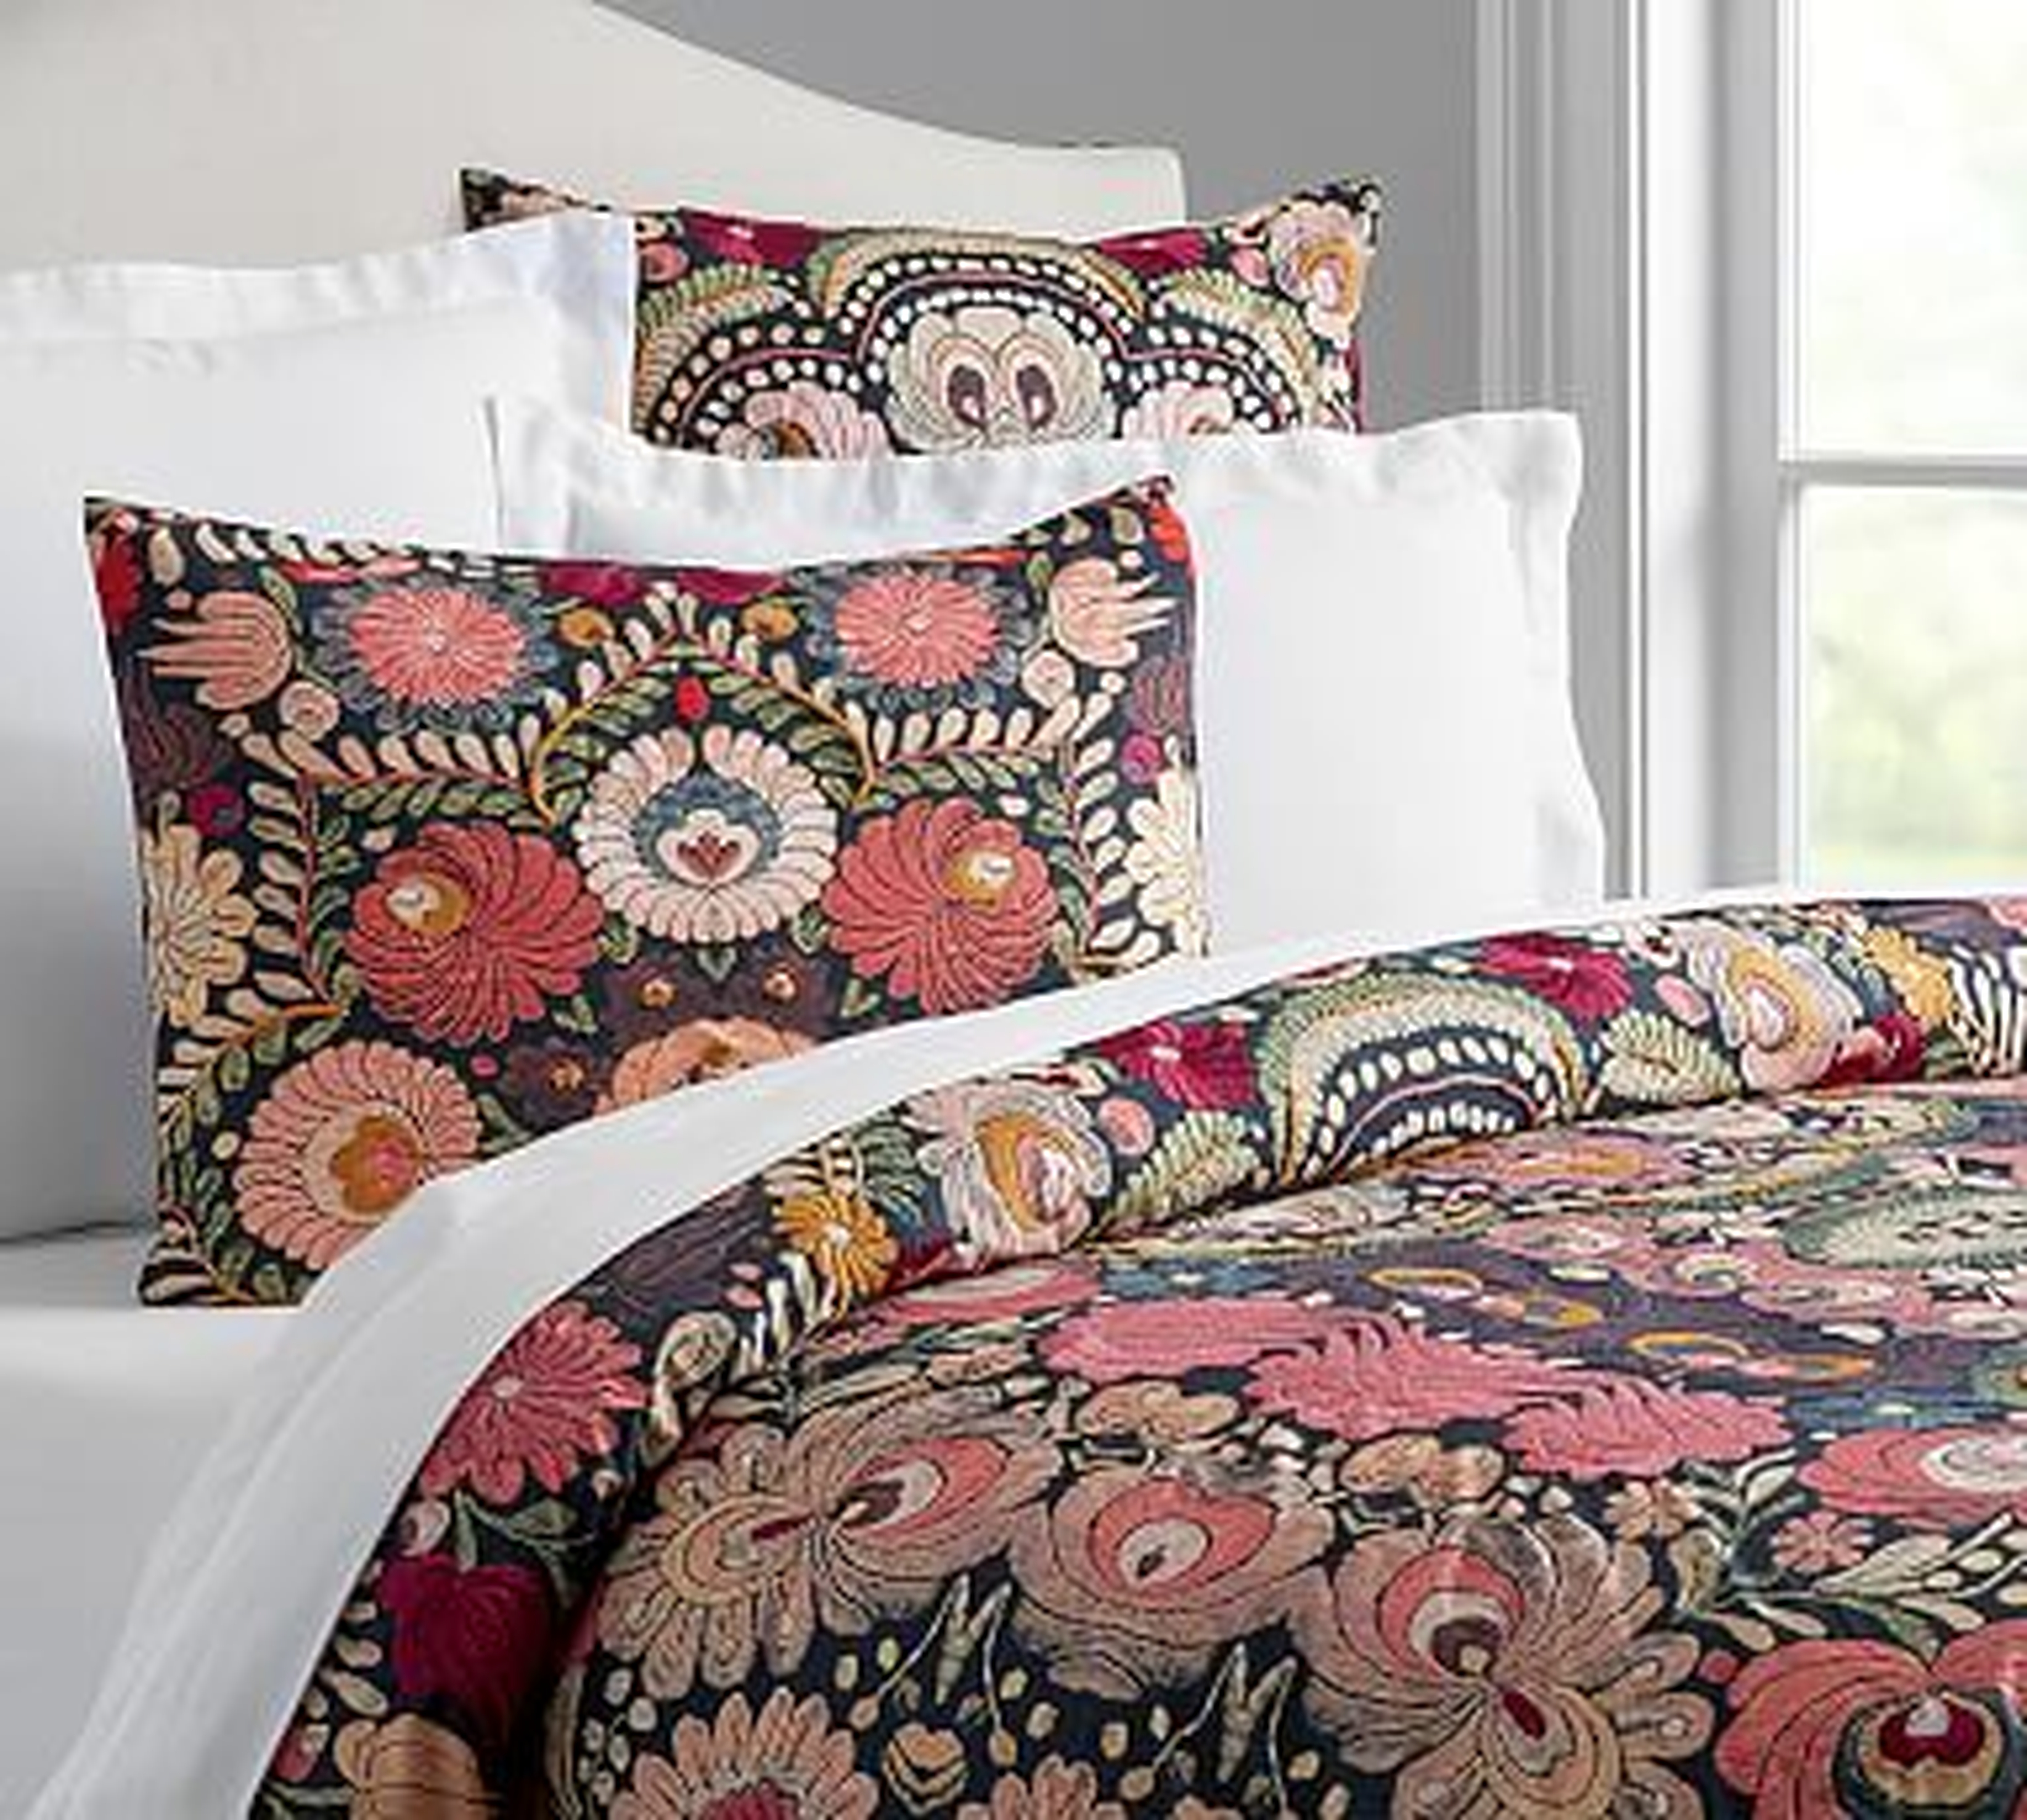 Black Helena Floral Embroidered Percale Duvet Cover, Full/Queen - Pottery Barn